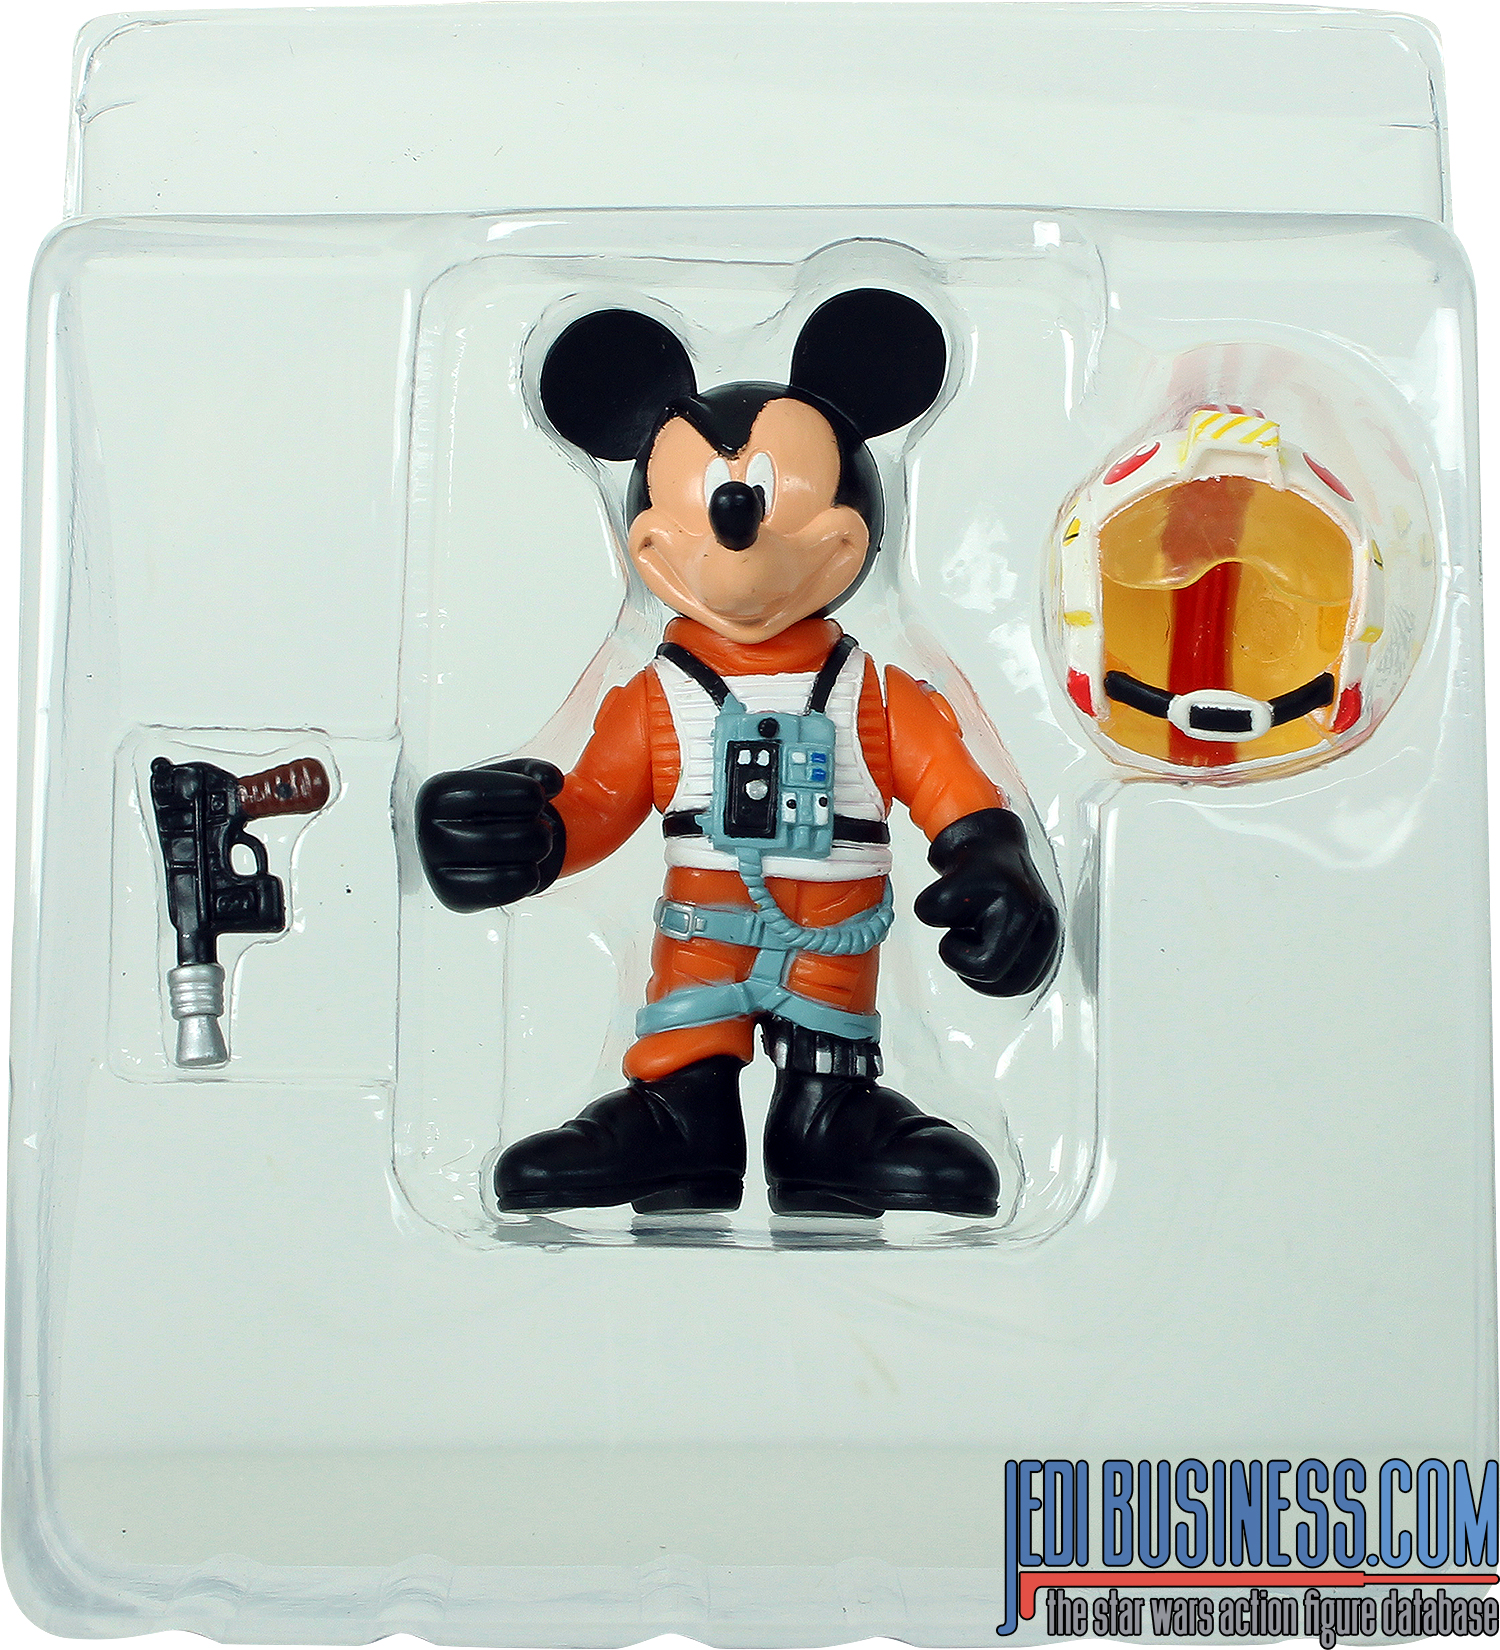 Mickey Mouse Series 3 - Mickey Mouse As Luke Skywalker (X-Wing Pilot)